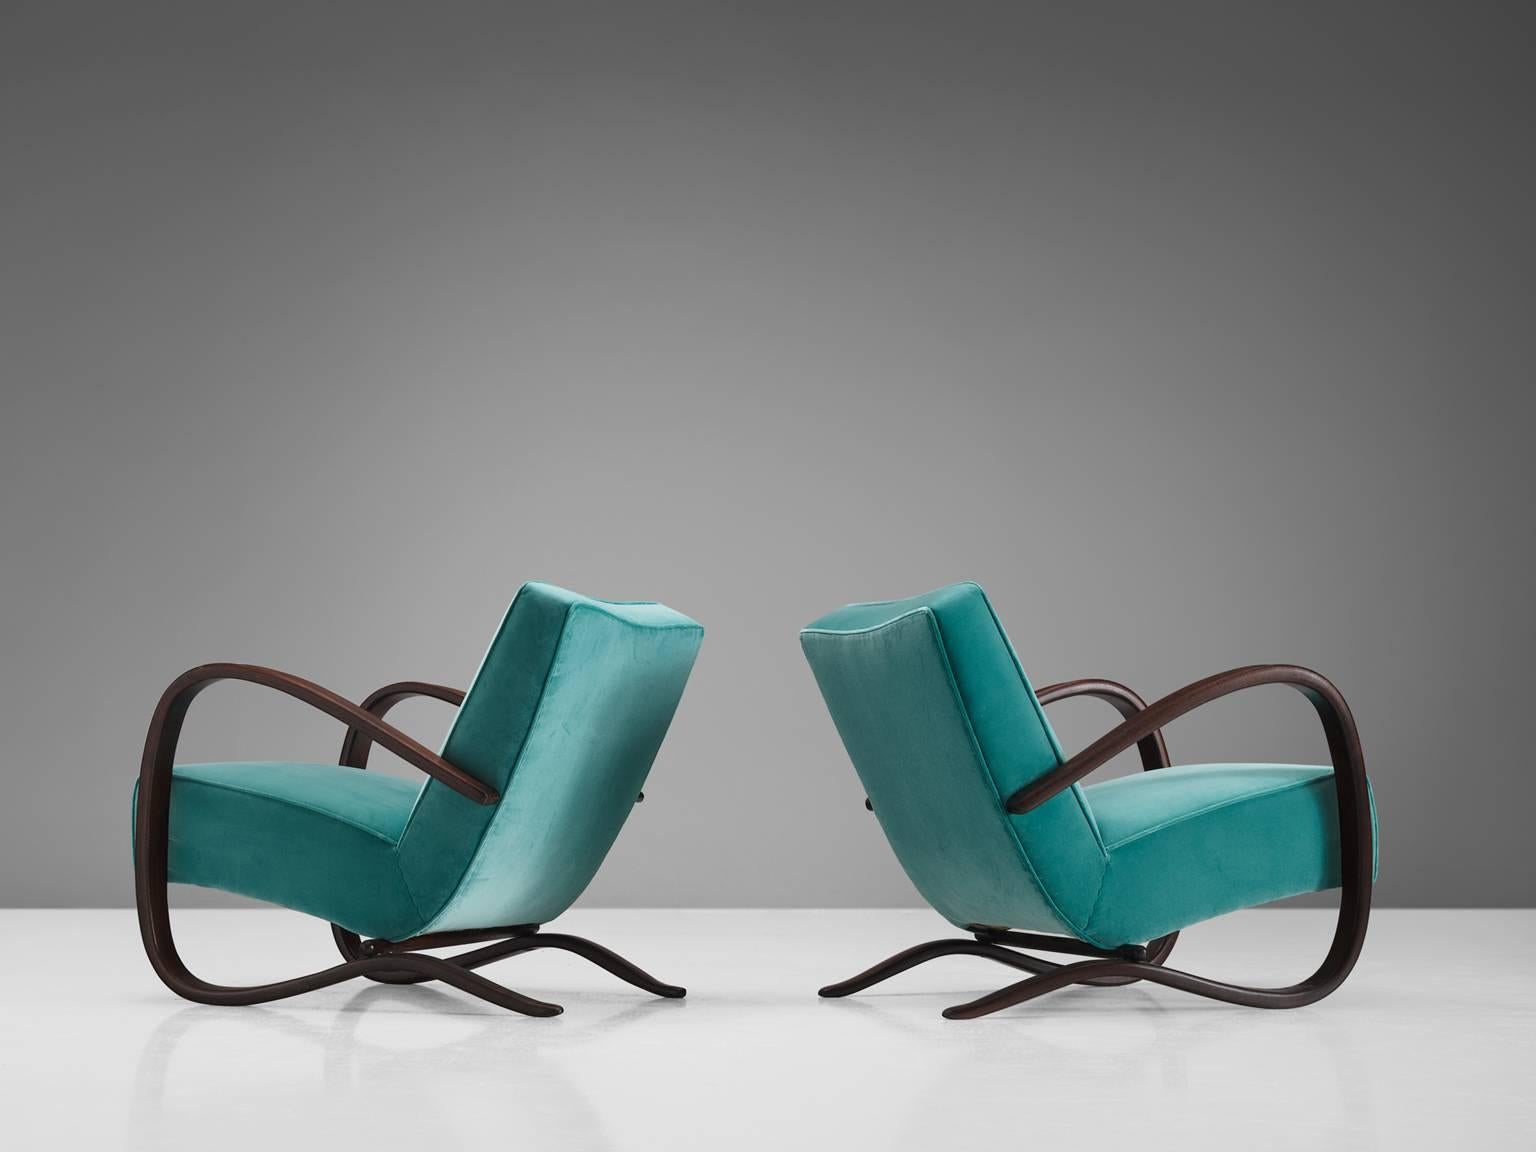 Czech Jindrich Halabala Lounge Chairs in Reupholstered in Turquoise Velvet